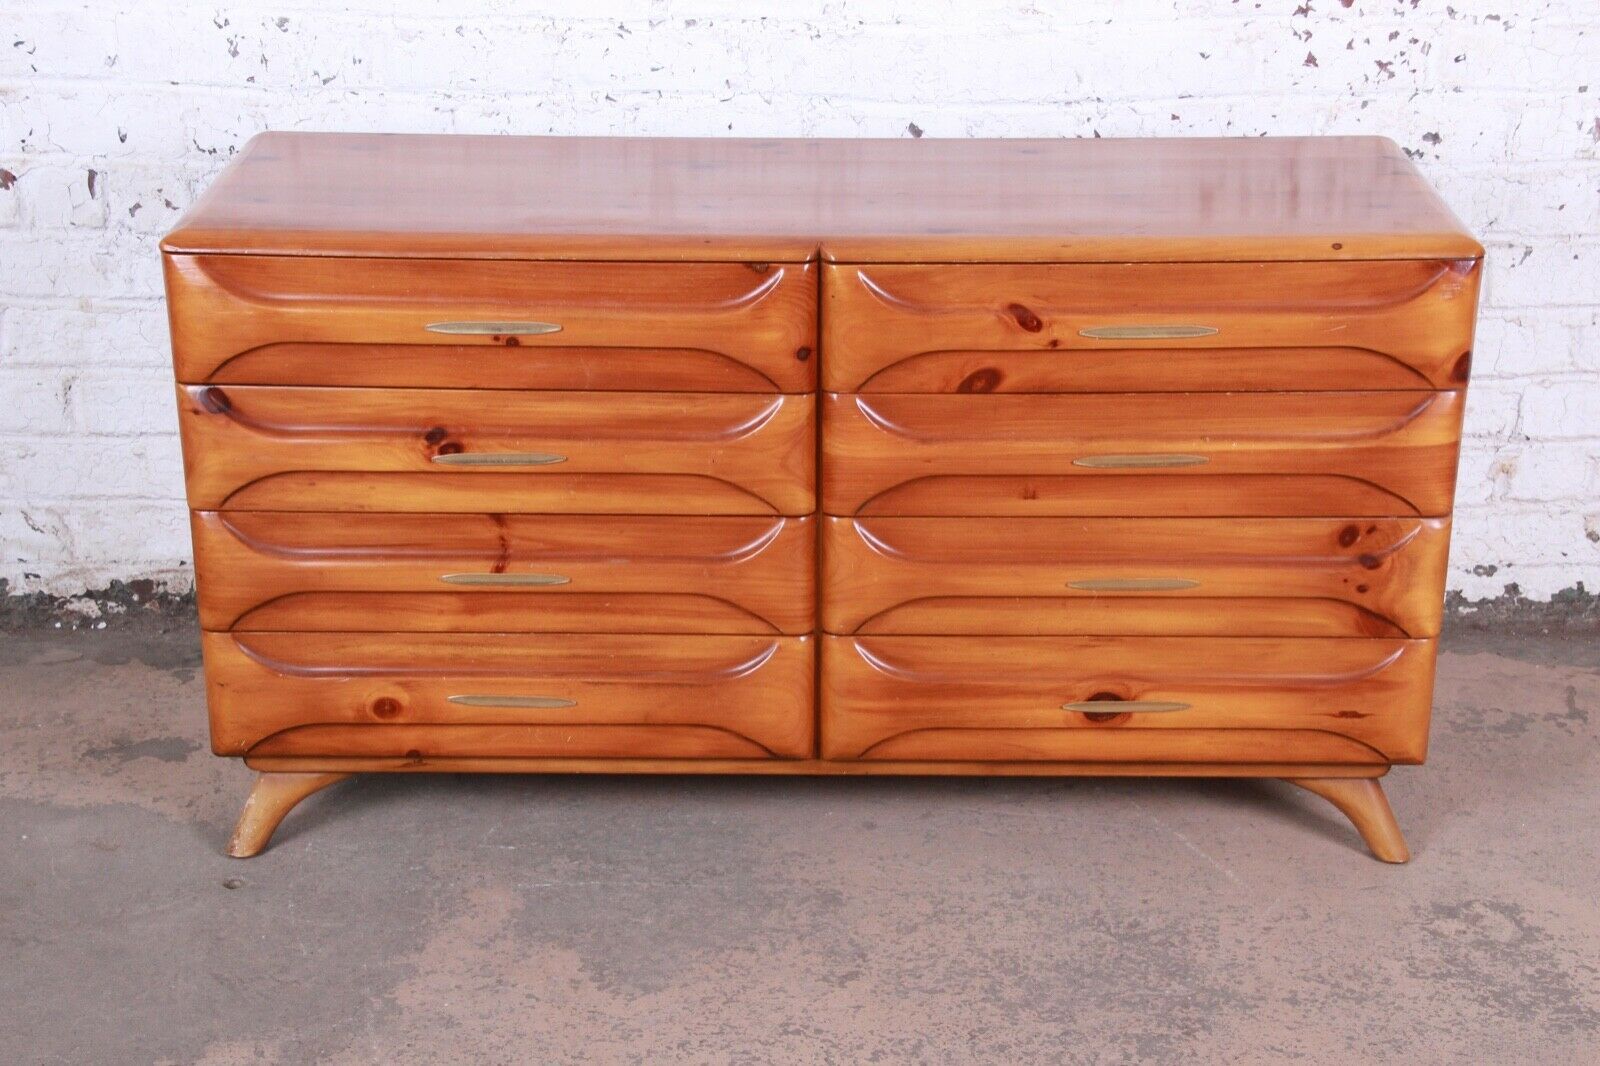 Franklin Shockey Rustic Modern Sculptured Pine Double Dresser Or Credenza,  1950s In Latest Lowrey Credenzas (View 12 of 20)